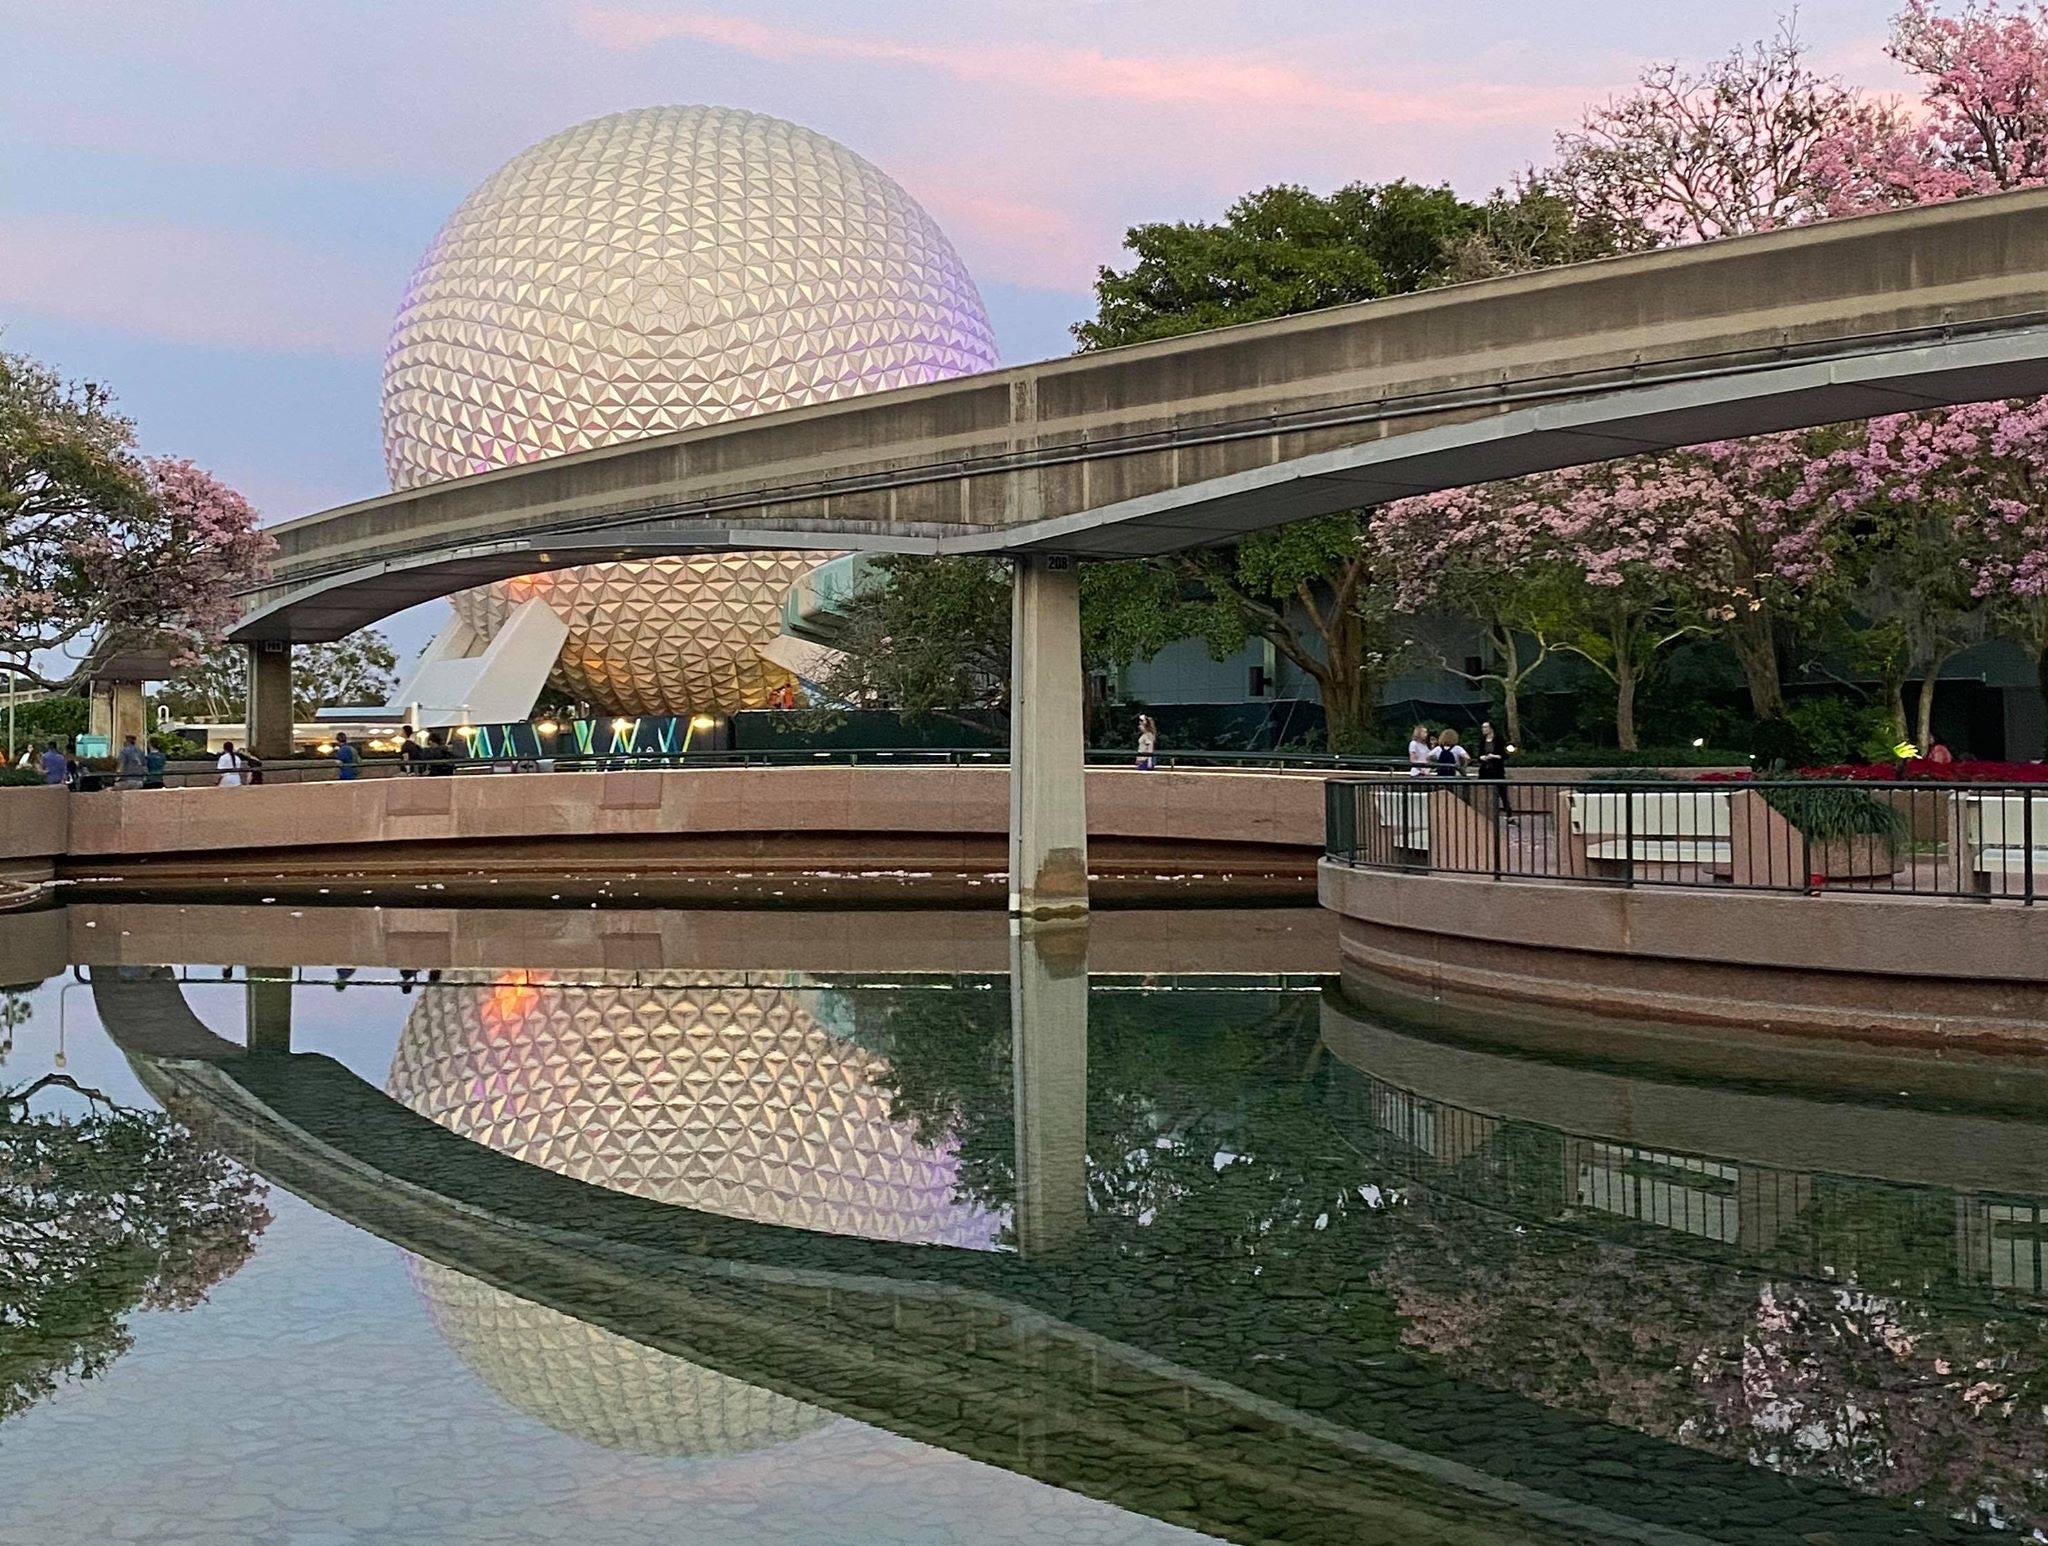 Spend a Virtual Day at Epcot